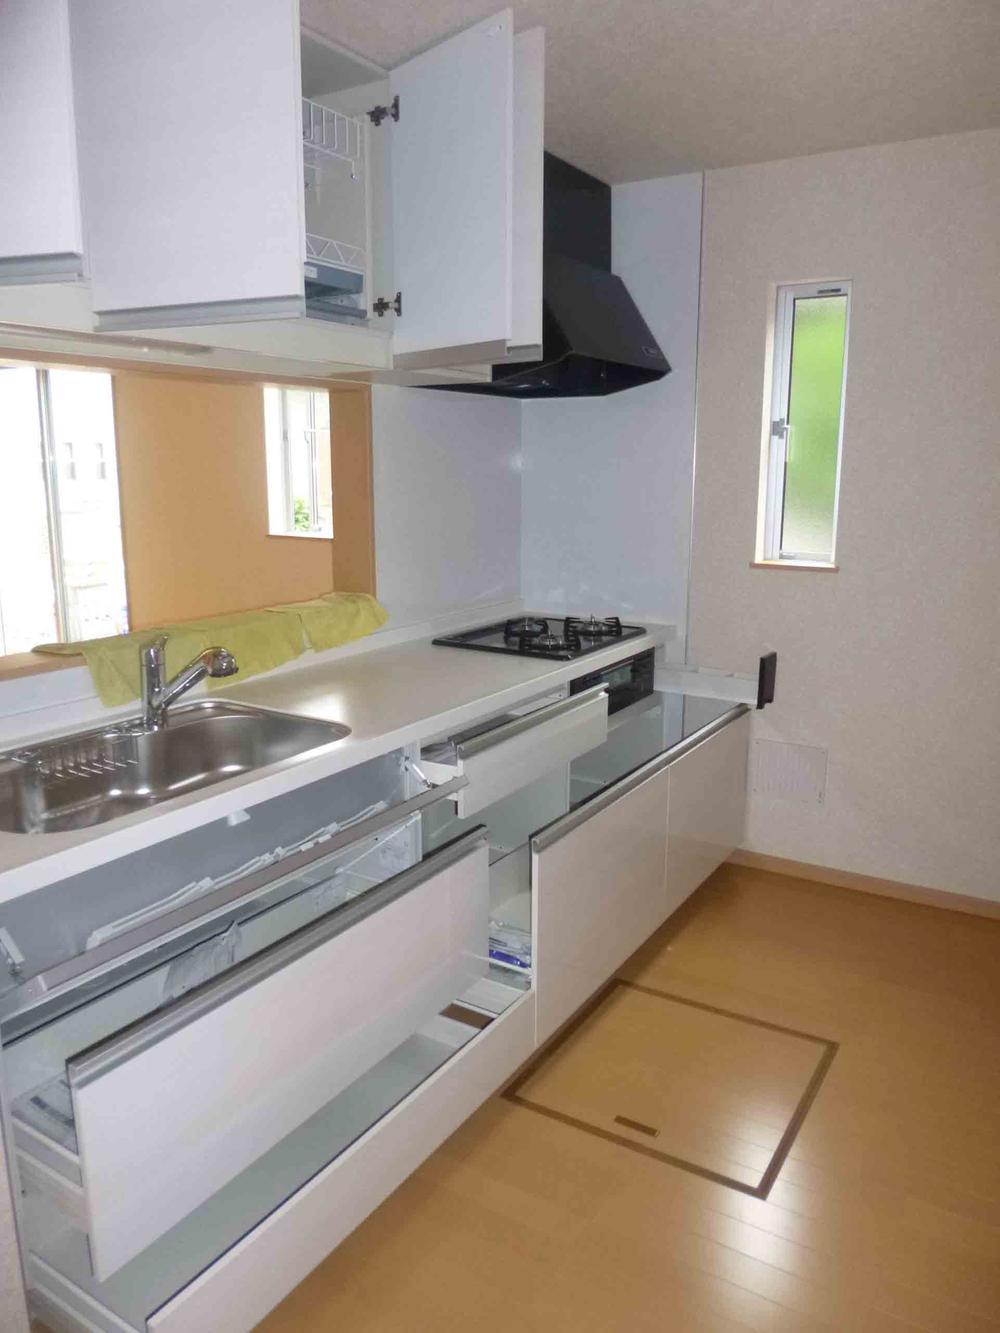 Same specifications photo (kitchen). Example of construction. Storage enhancement of kitchen